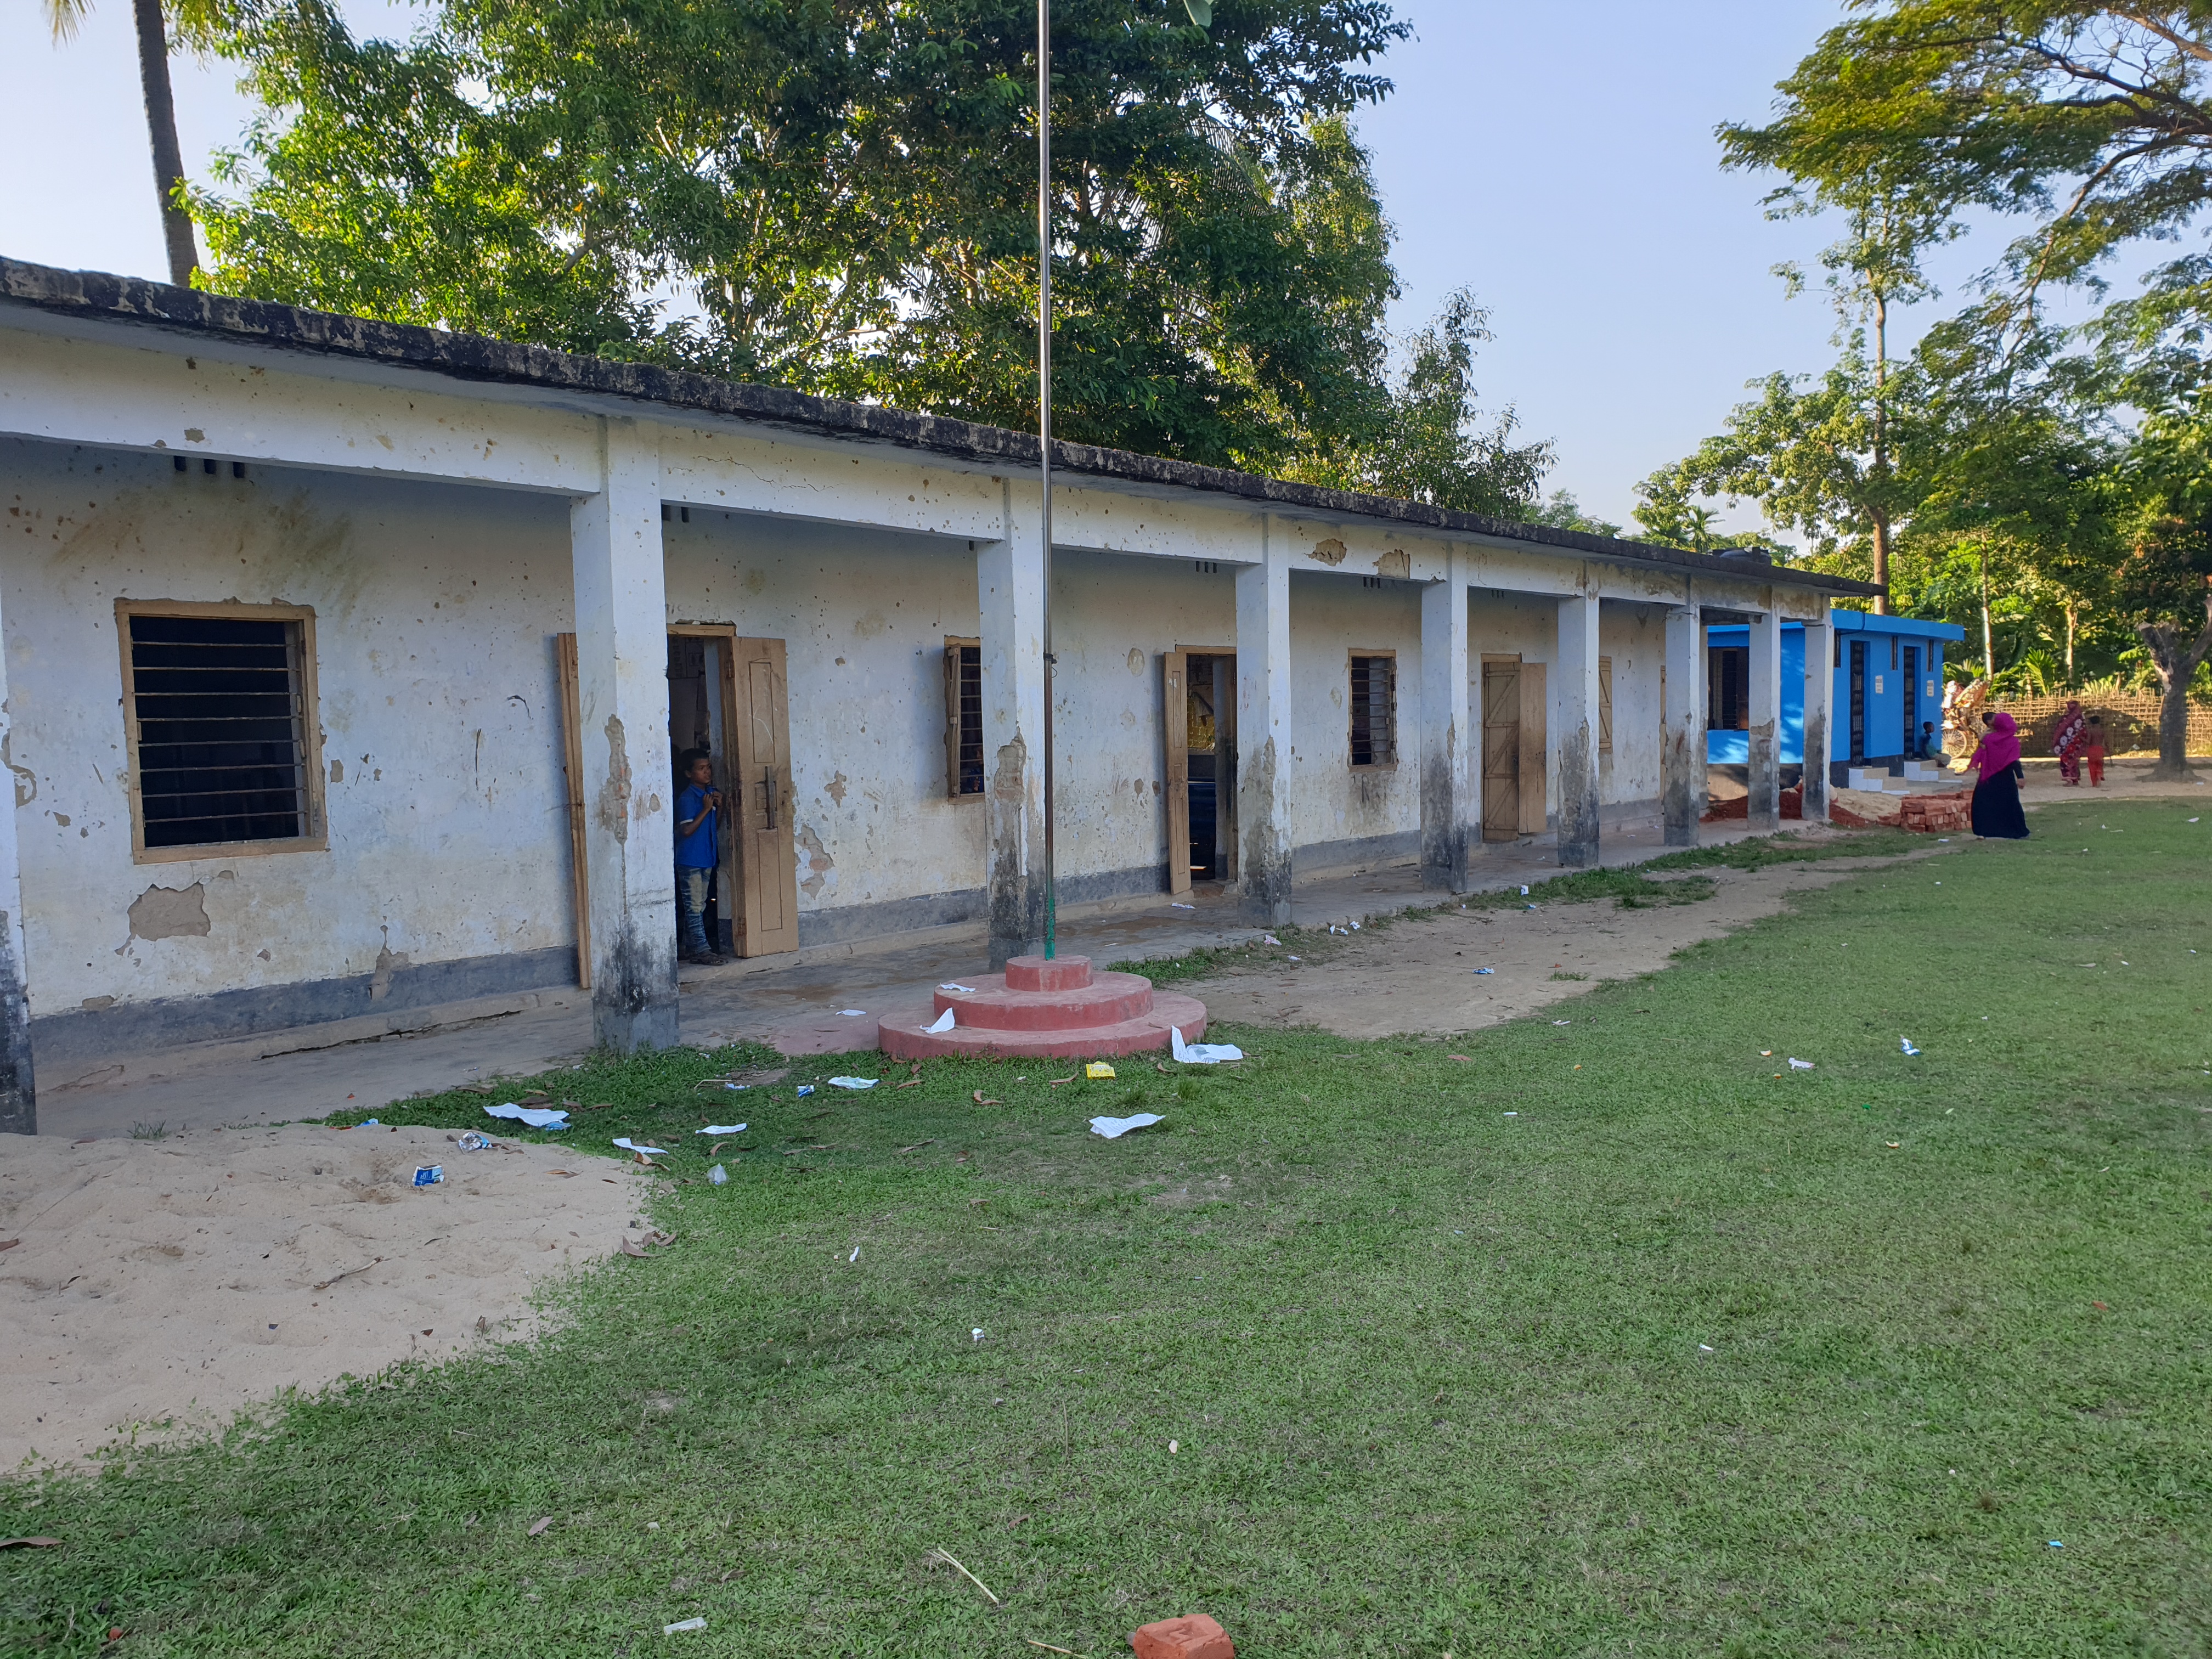 Existing location of school cum disaster shelter building in Dargah Palong